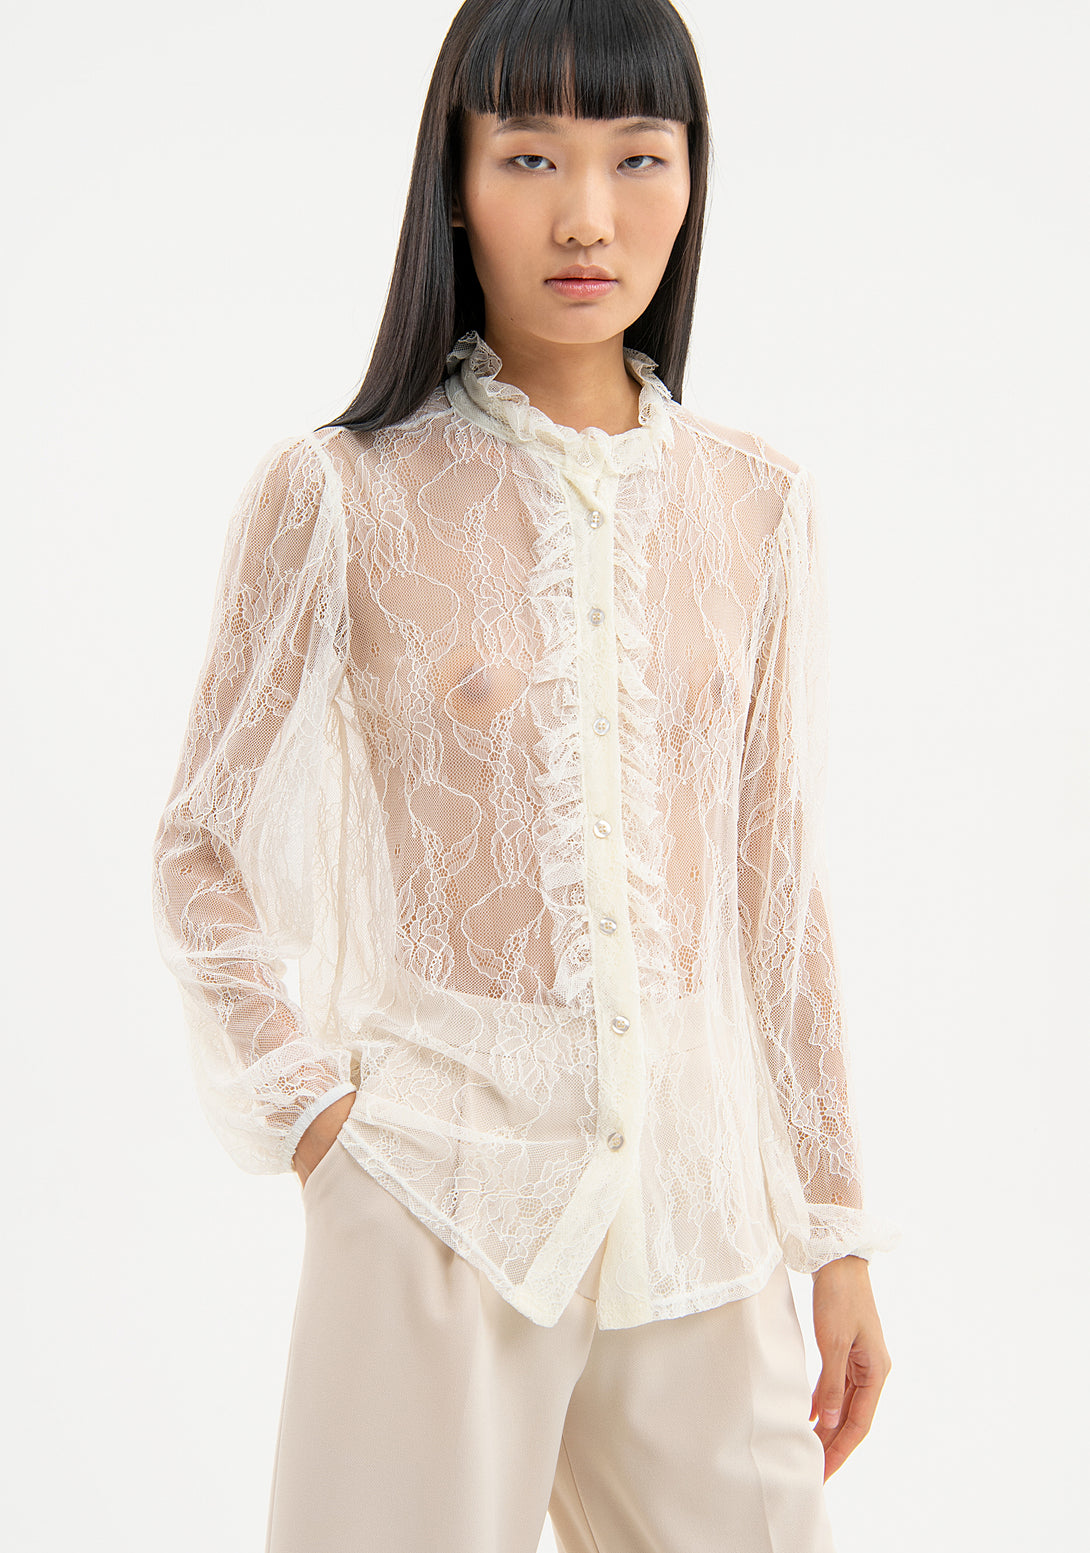 Shirt regular fit made in lace